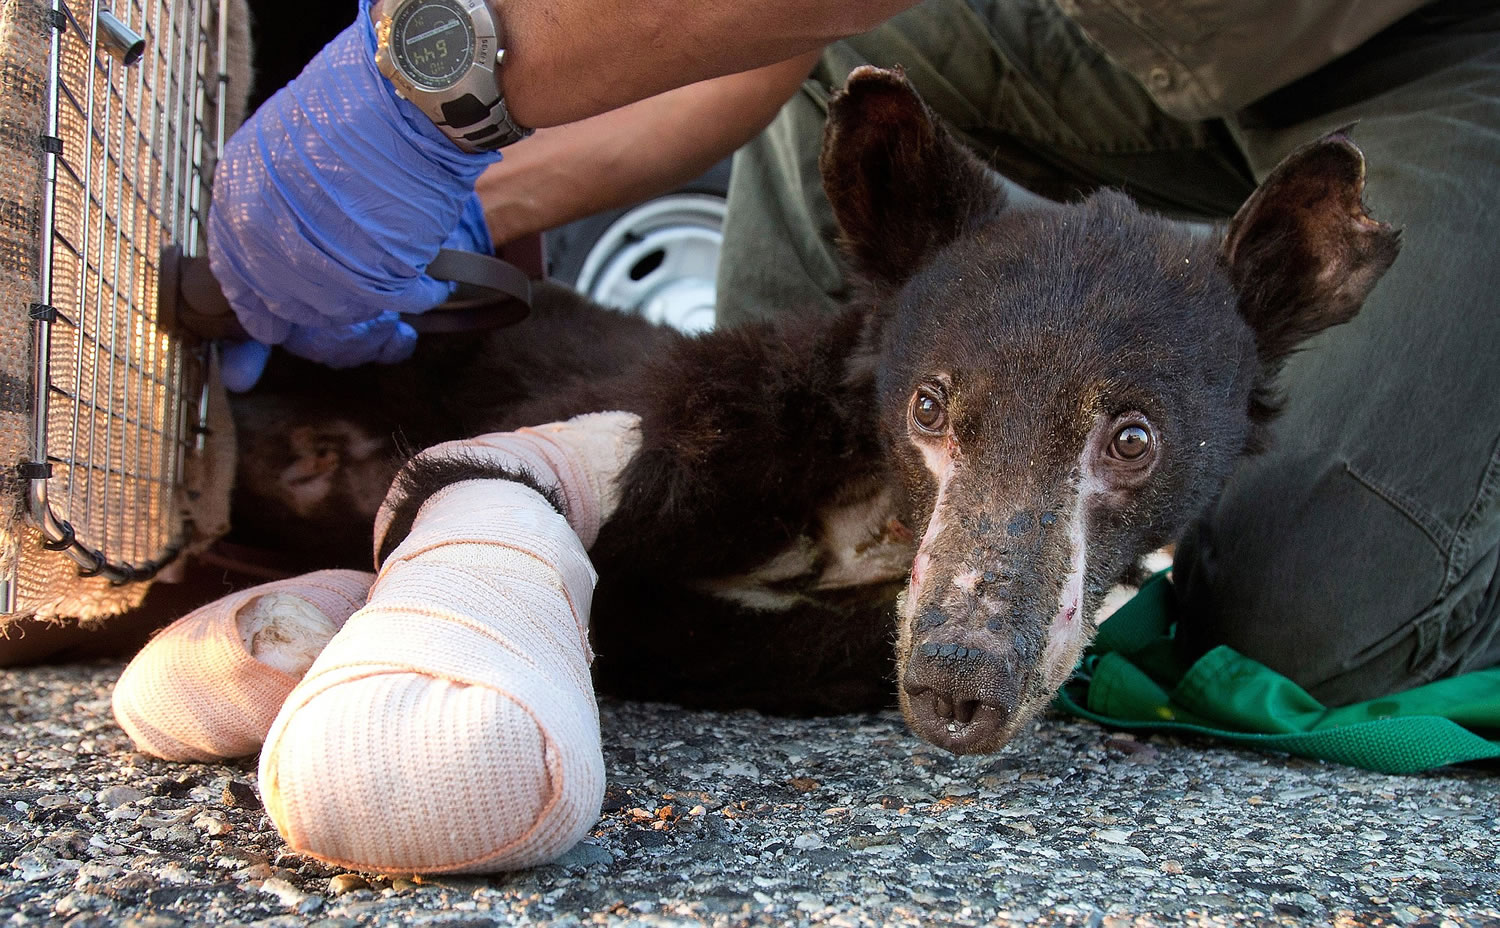 A female bear cub with badly burned paws who had been named Cinder is put into a crate before a flight Aug. 4 from East Wenatchee to Lake Tahoe, Calif.